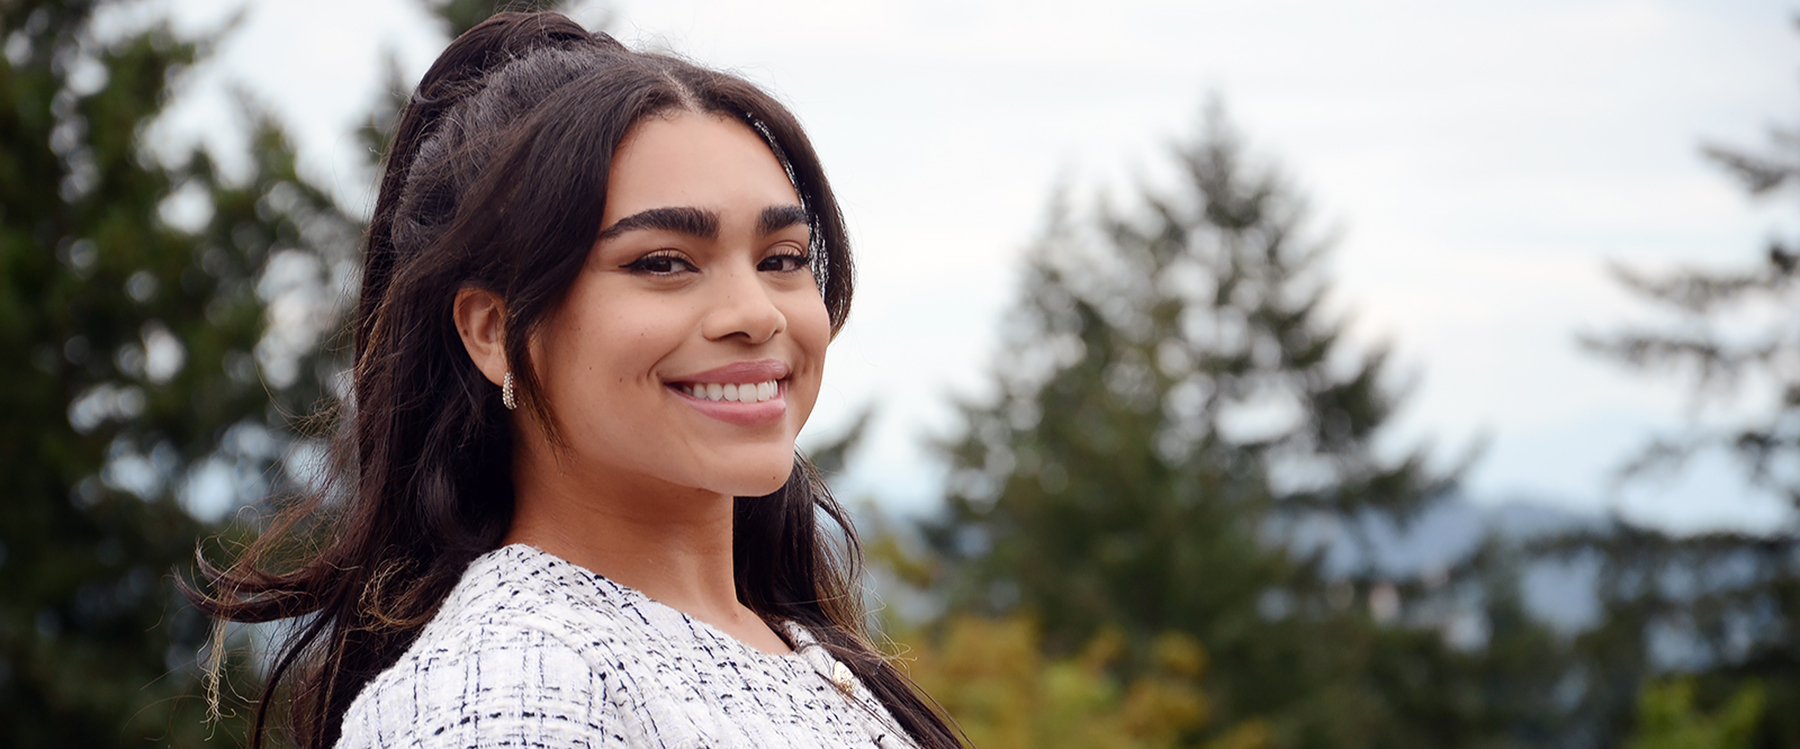 OHSU nursing student’s lived experience inspires values and goals